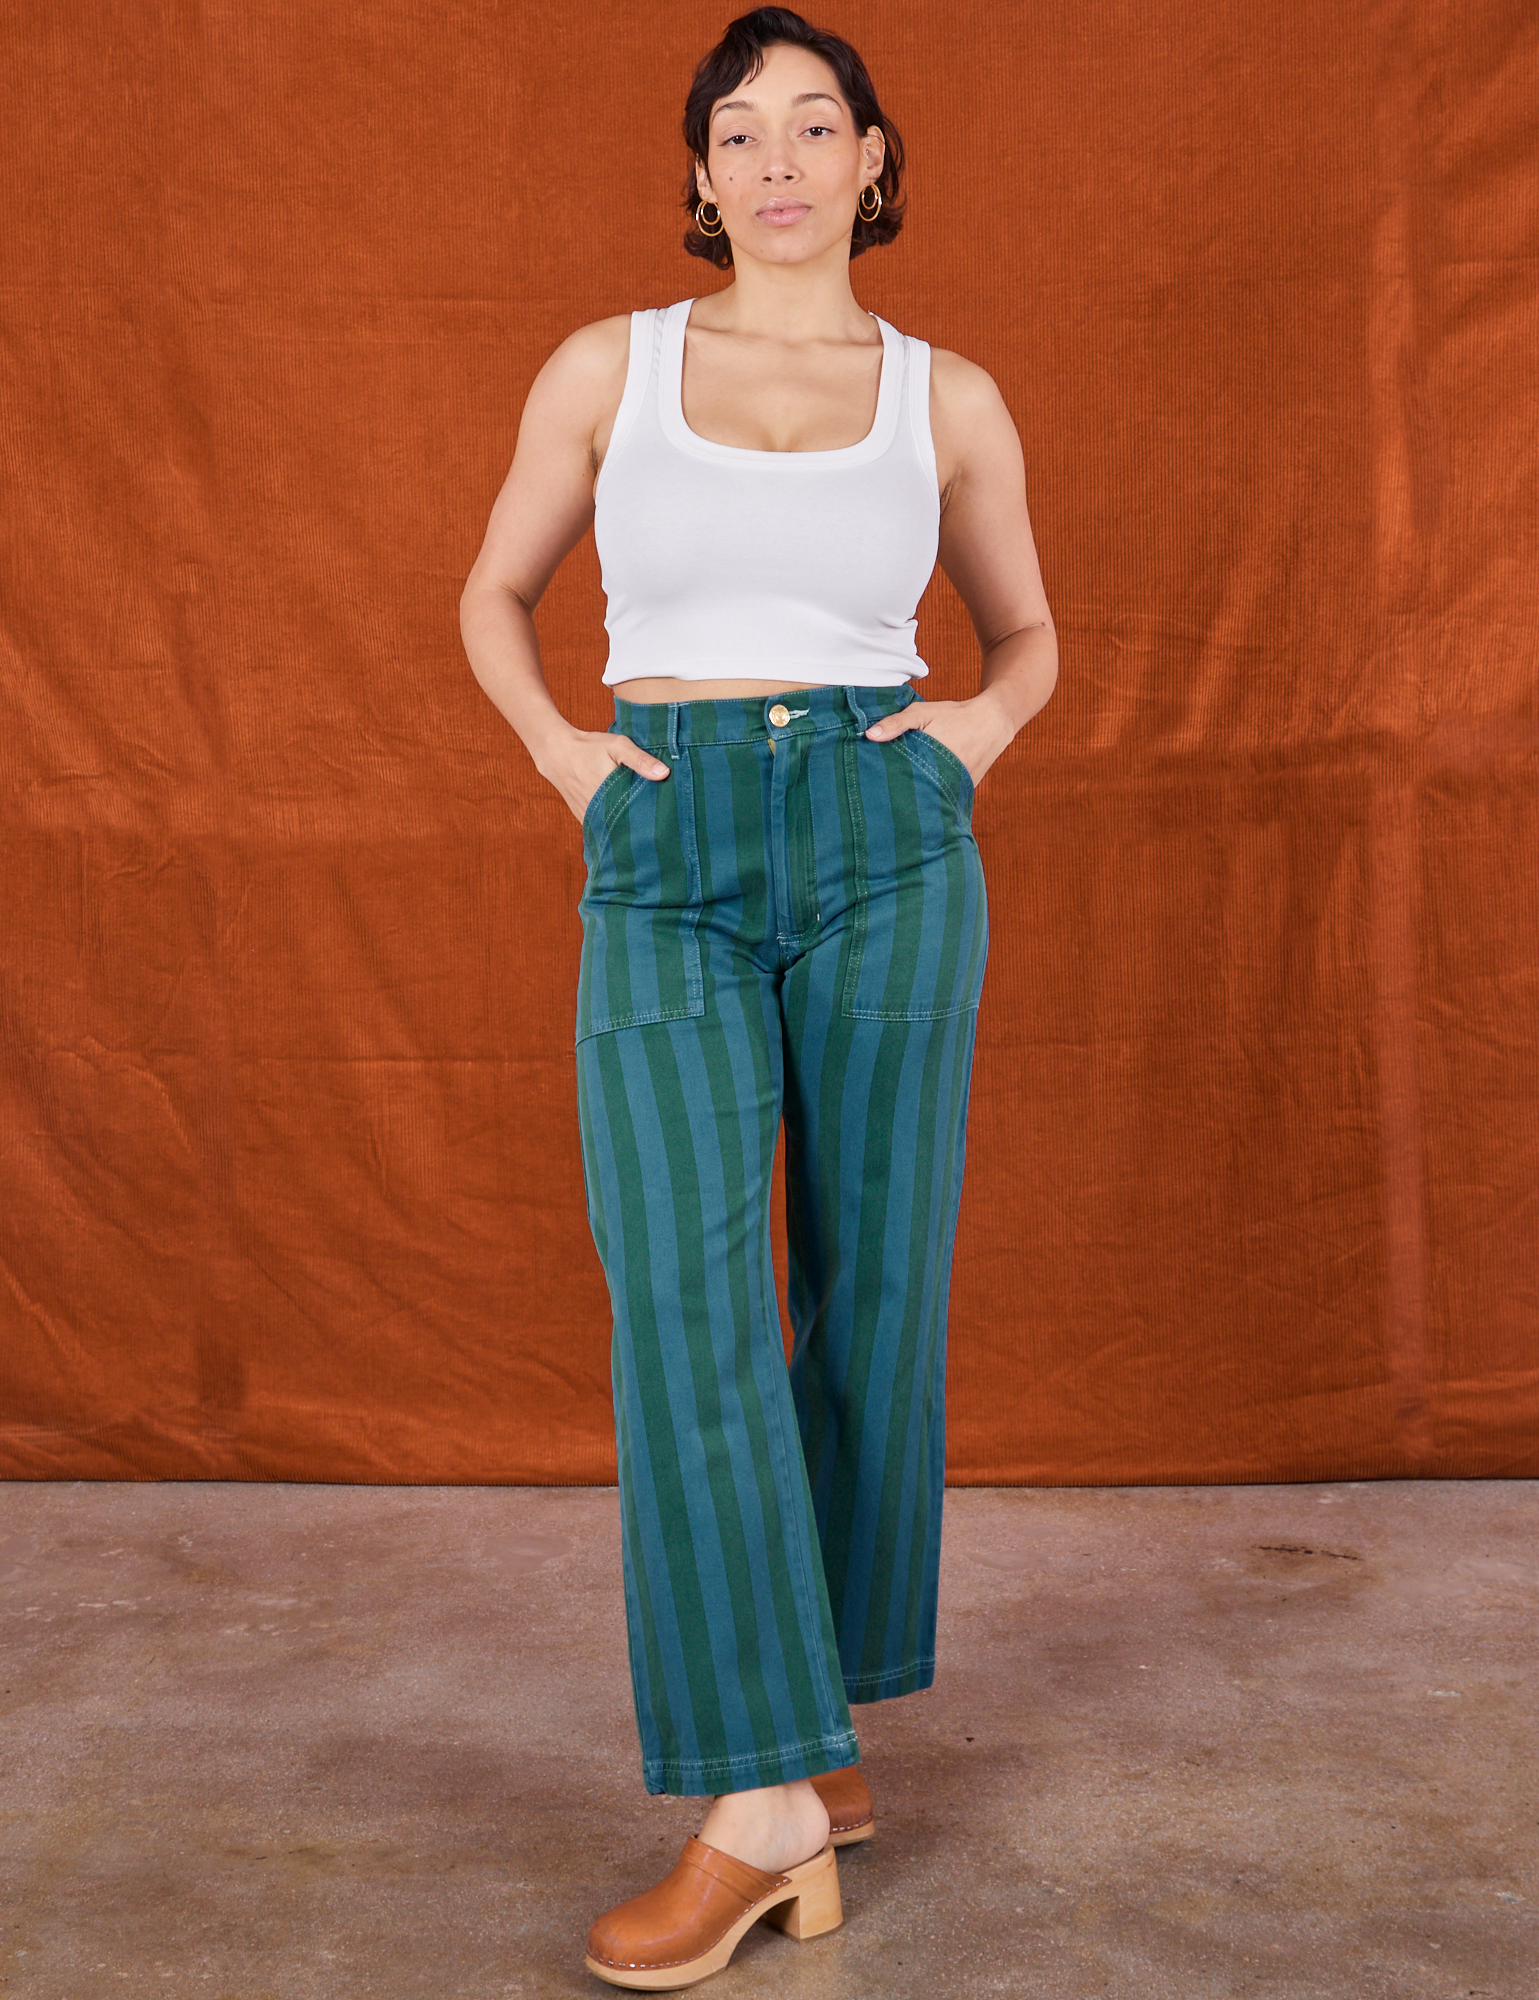 Tiara is wearing Overdye Stripe Work Pants in Blue/Green and Cropped Tank Top in vintage tee off-white